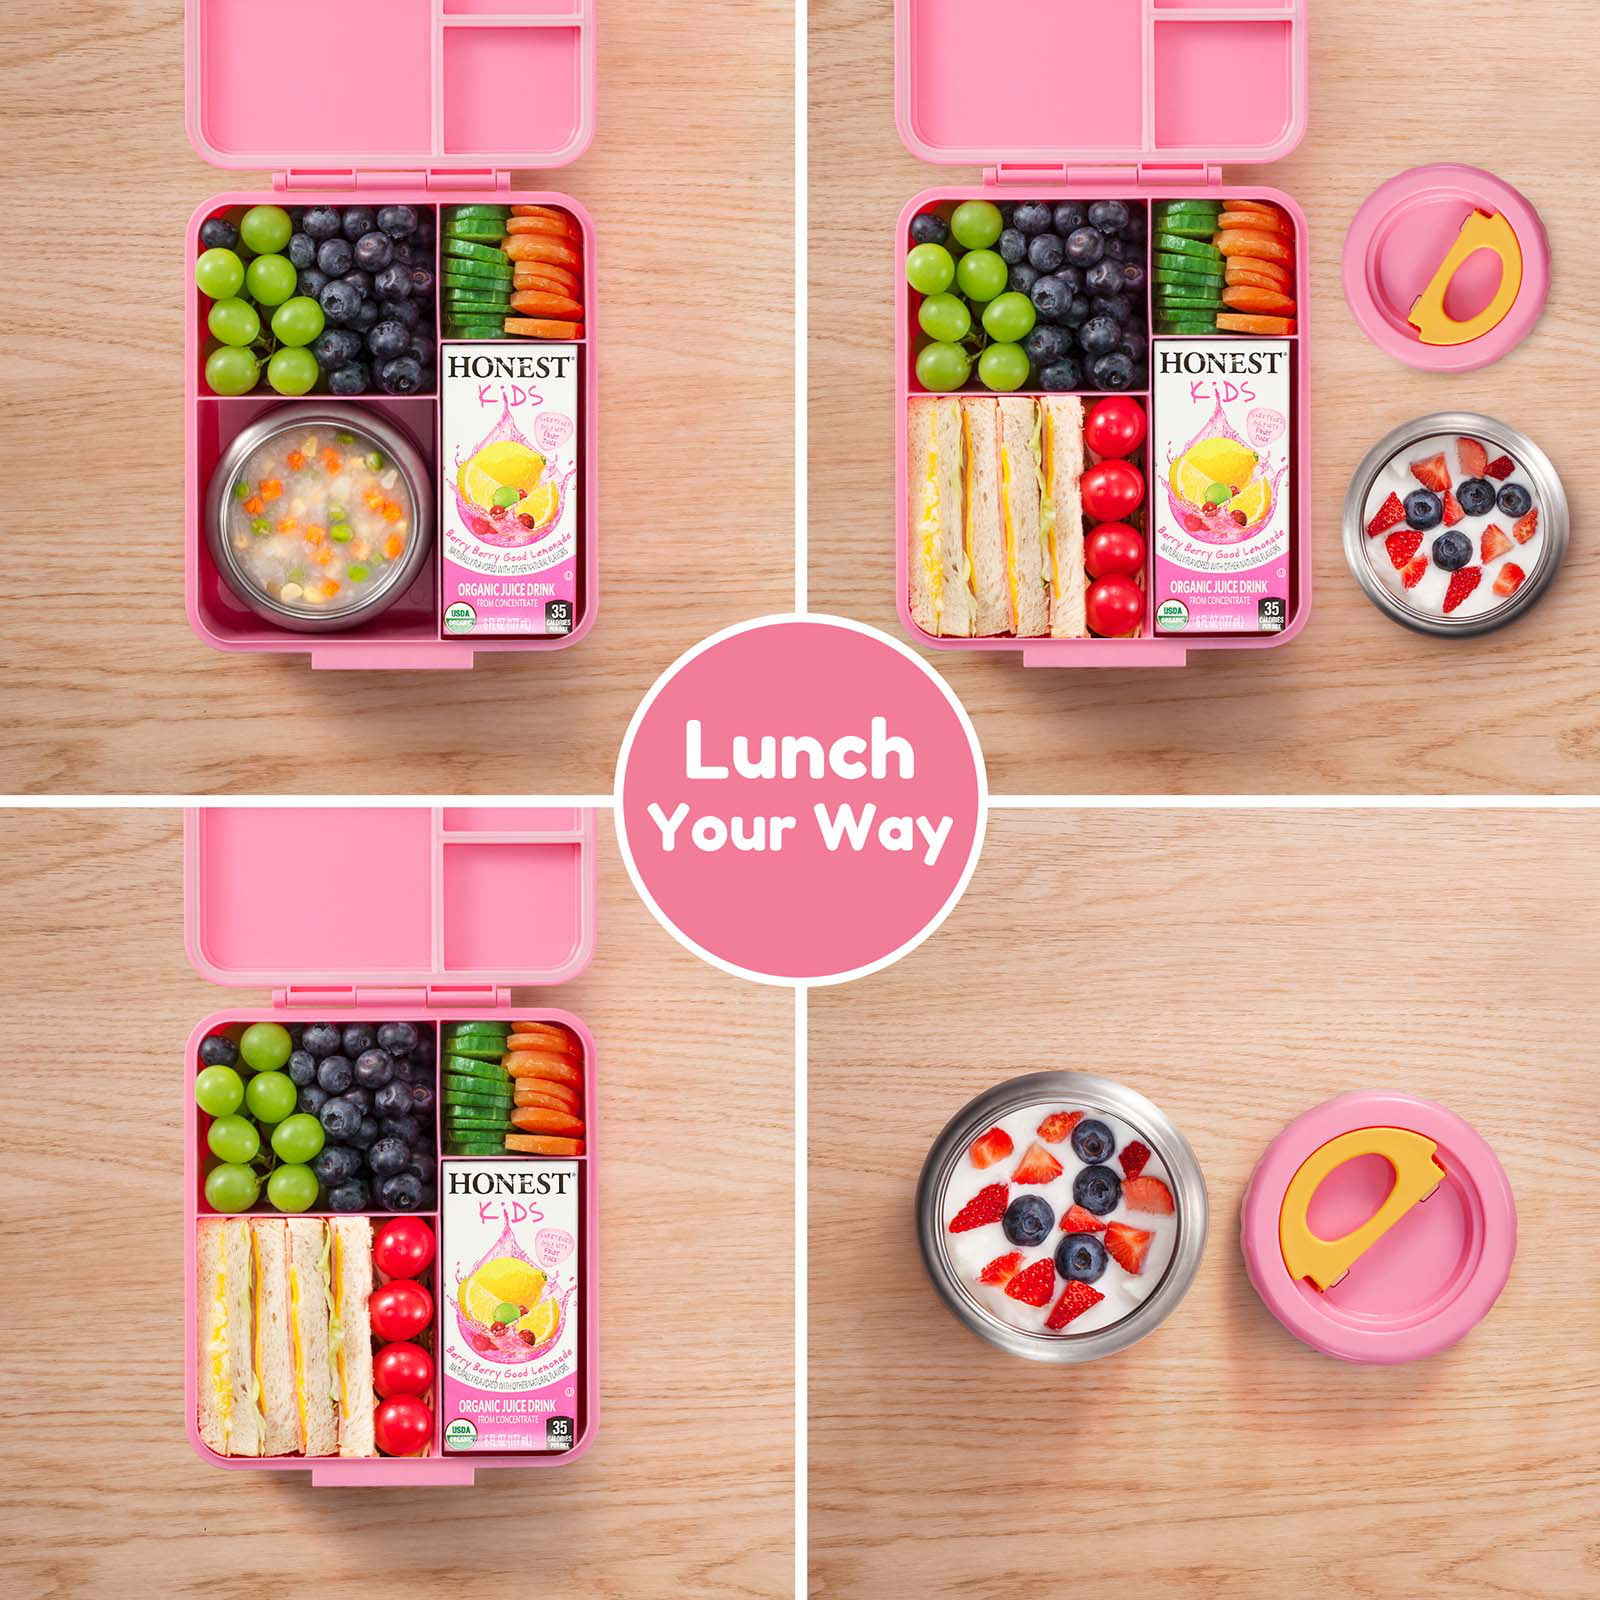 Caperci Premium Bento Box Adult Lunch Box for Older Kids - Leakproof 44 oz  3-Compartment Lunch Conta…See more Caperci Premium Bento Box Adult Lunch